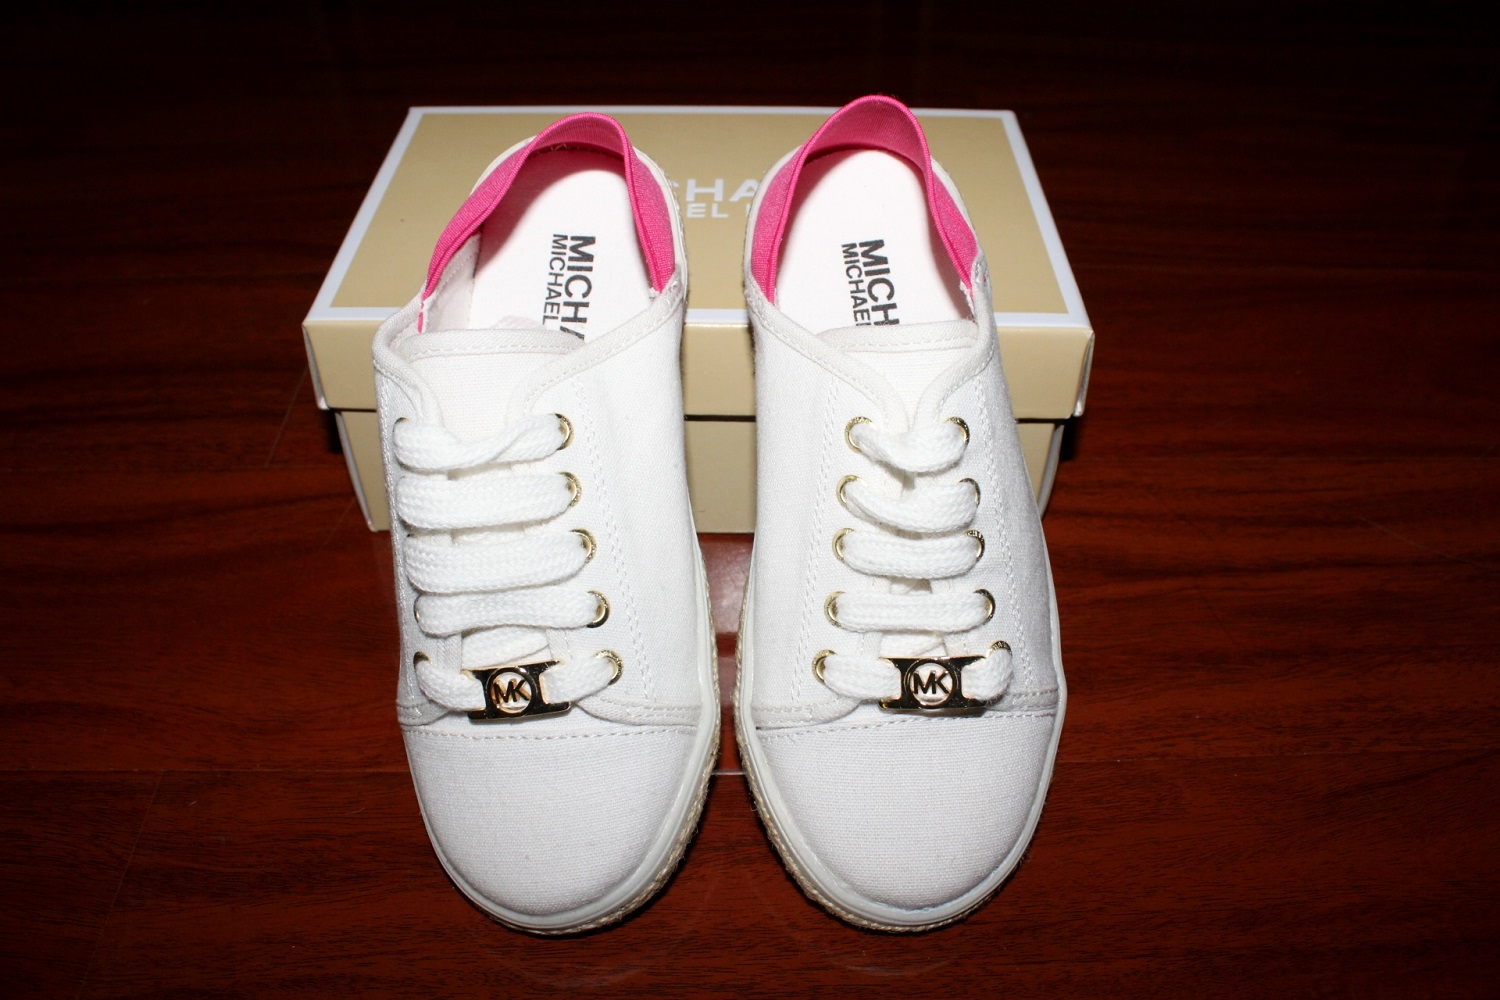 Giày sneaker Michael Kors Authentic USA cho nữ 43F0IRFP7L IRVING STRIPE  LACE UP LEATHER Size 5  35